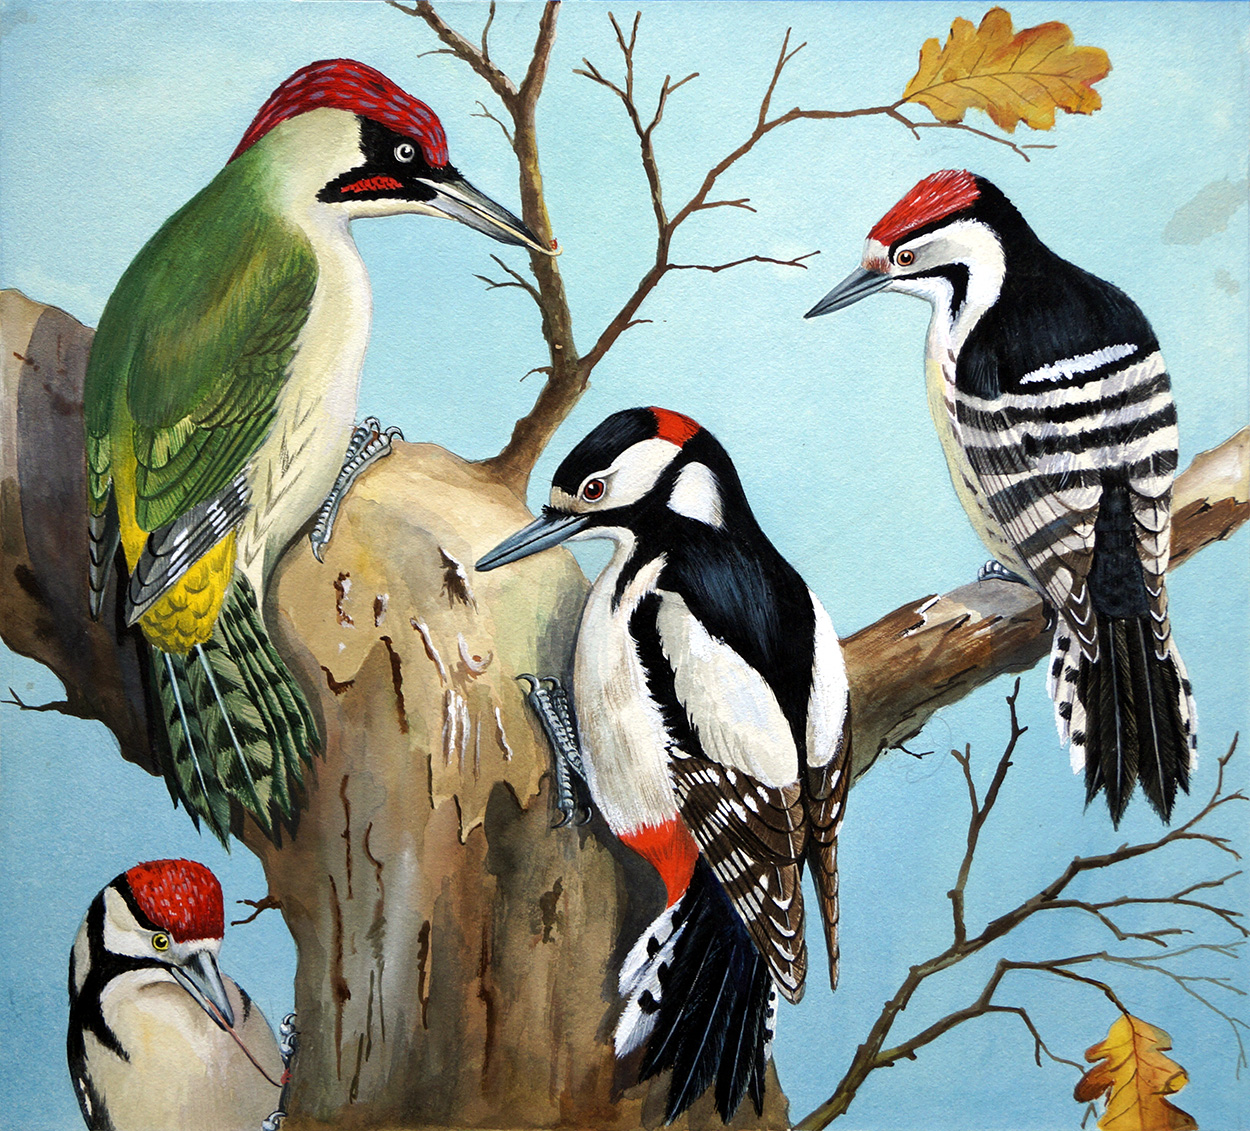 Four Woodpeckers (Original) art by John Rignall at The Illustration Art Gallery